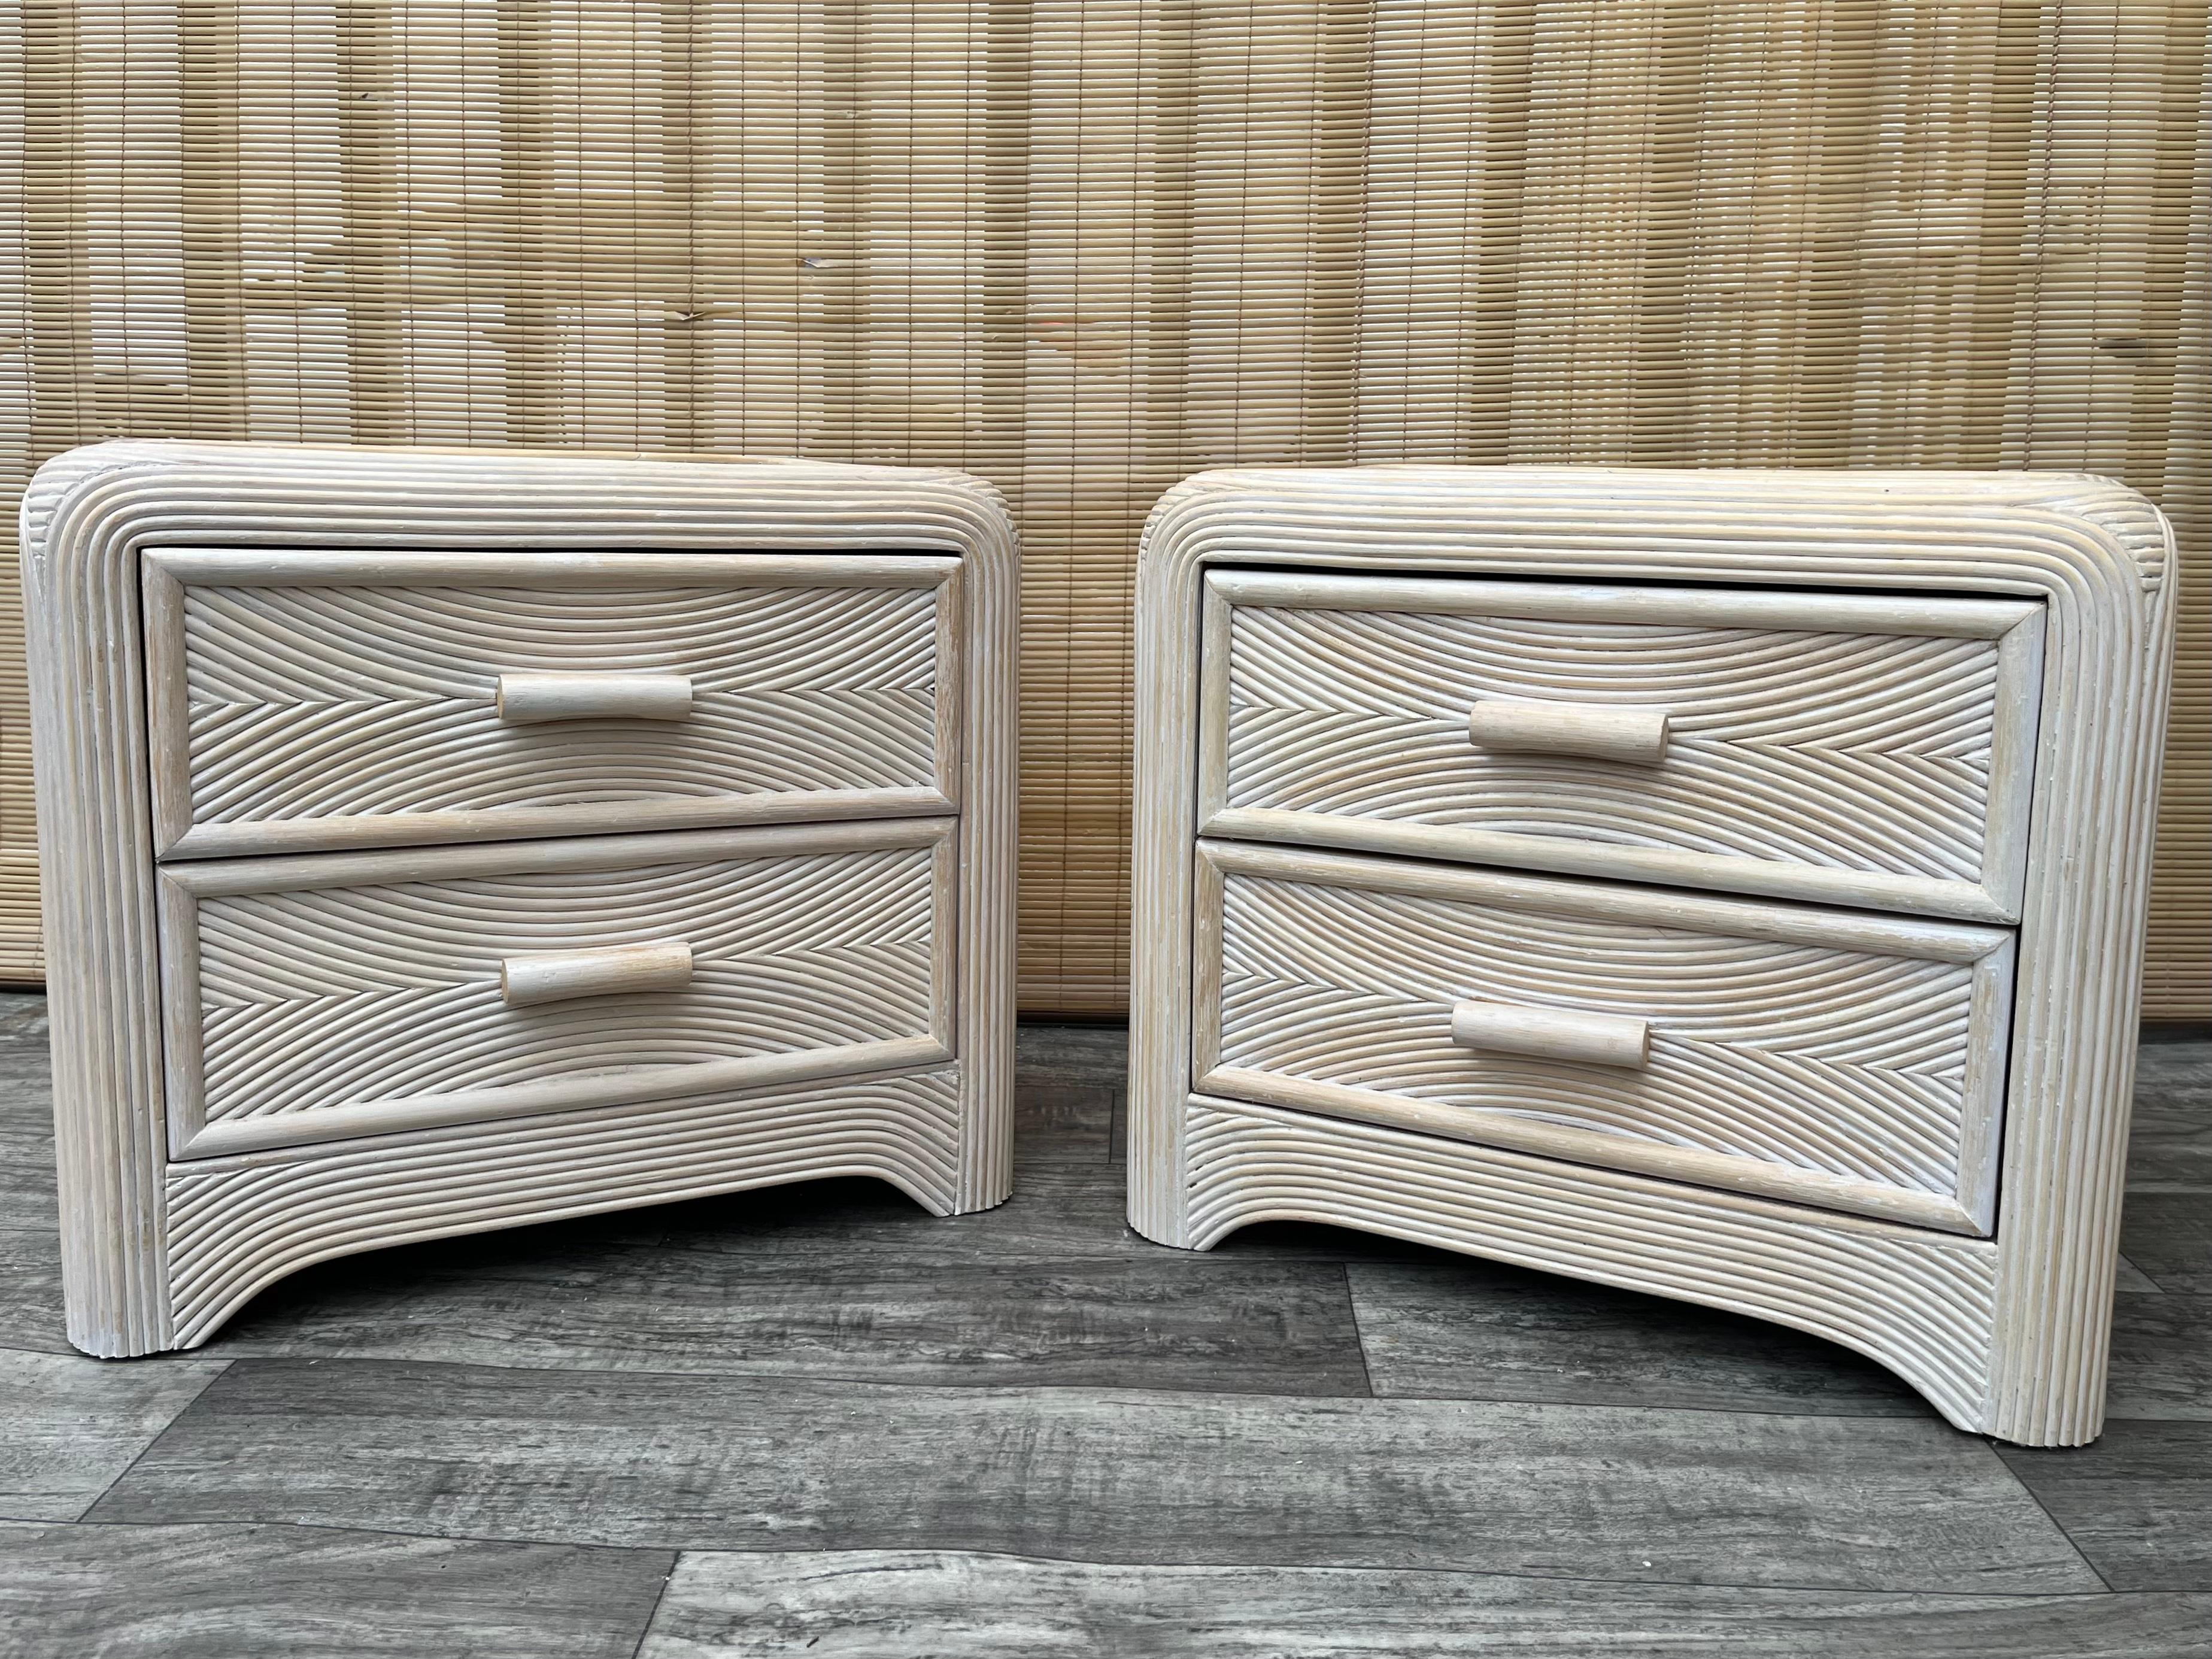 A Pair of Coastal Style Split Reed Rattan Nightstands. Circa 1980s
Feature a chic rattan and split pencil reed swirl pattern design with rounded corners in a beautiful soft cream color with two drawers that offer plenty of storage space.
In